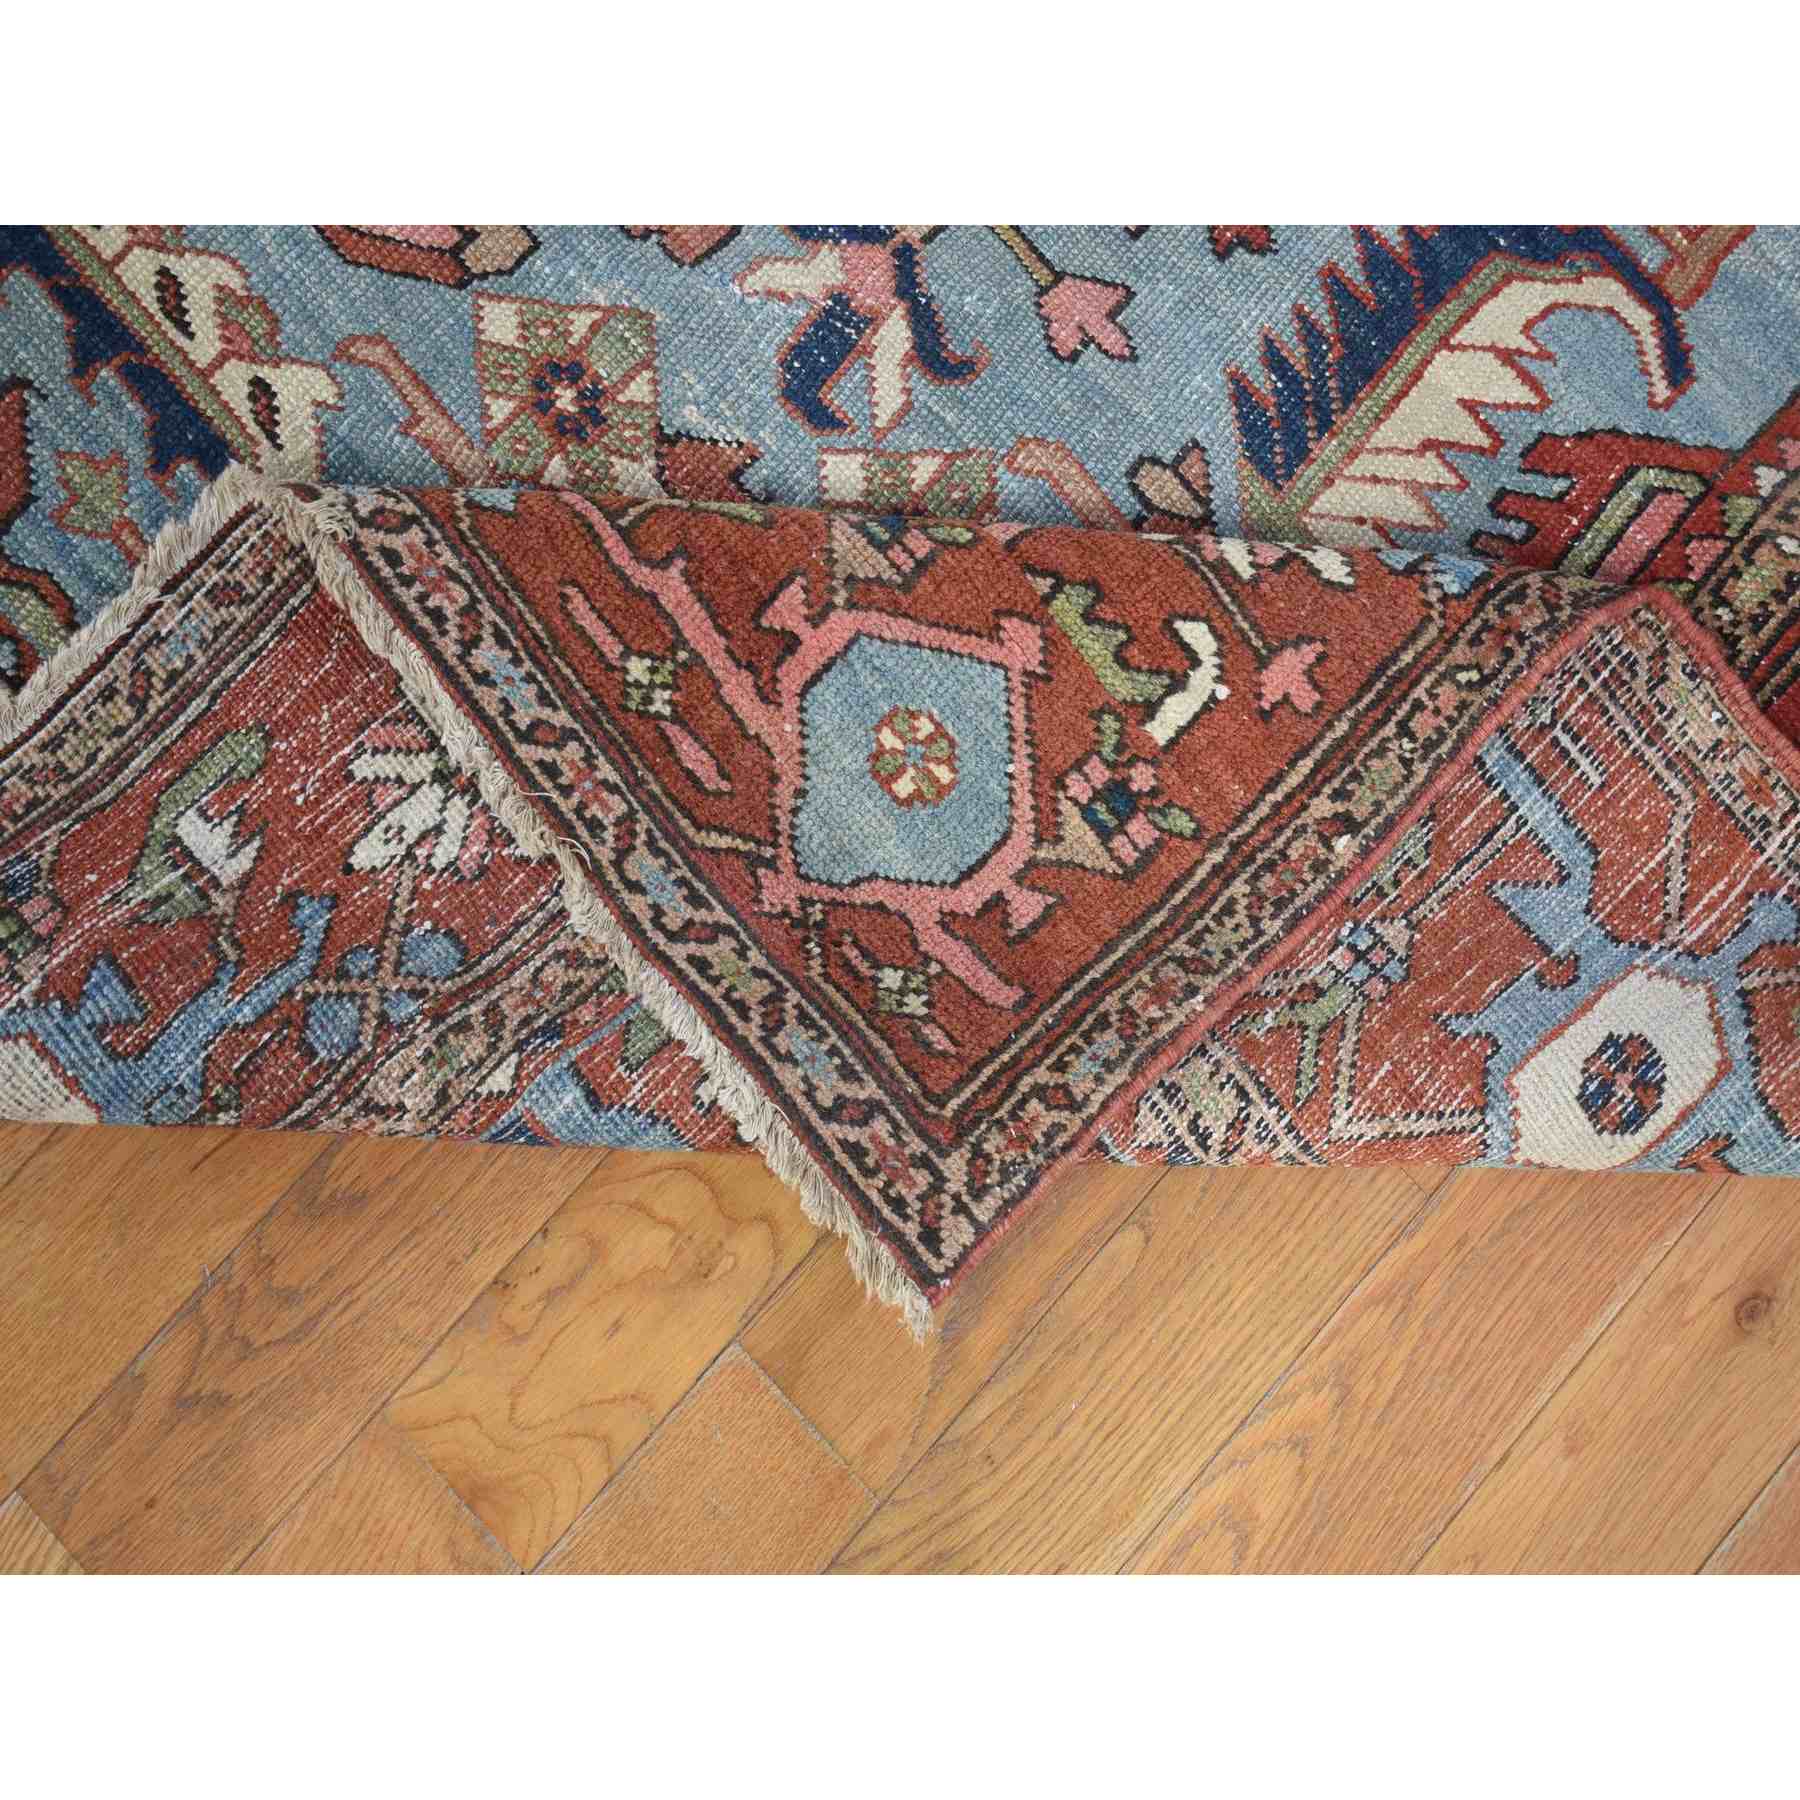 Antique-Hand-Knotted-Rug-400260